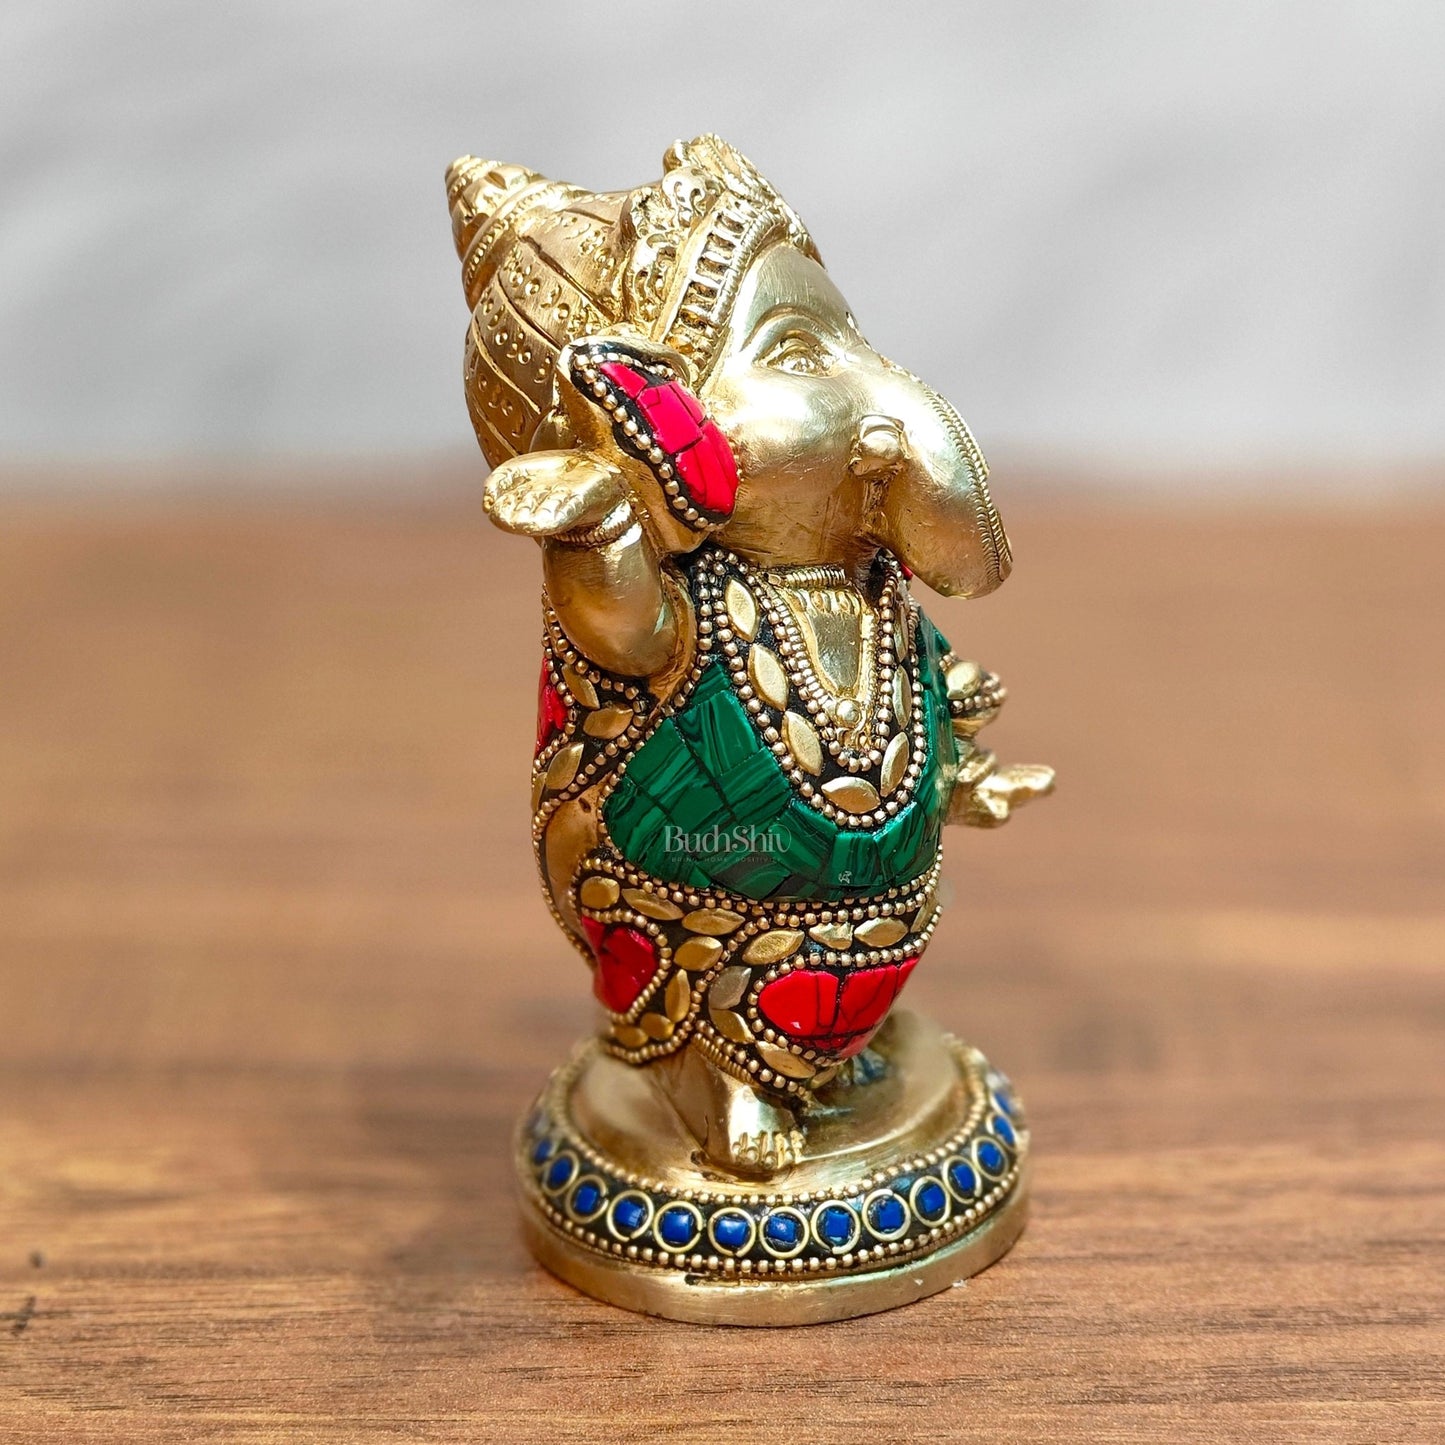 Baby Ganesha Dancing Brass Idol 5" Perfect for Office Desk, Study Table, Temple - stonework - Budhshiv.com